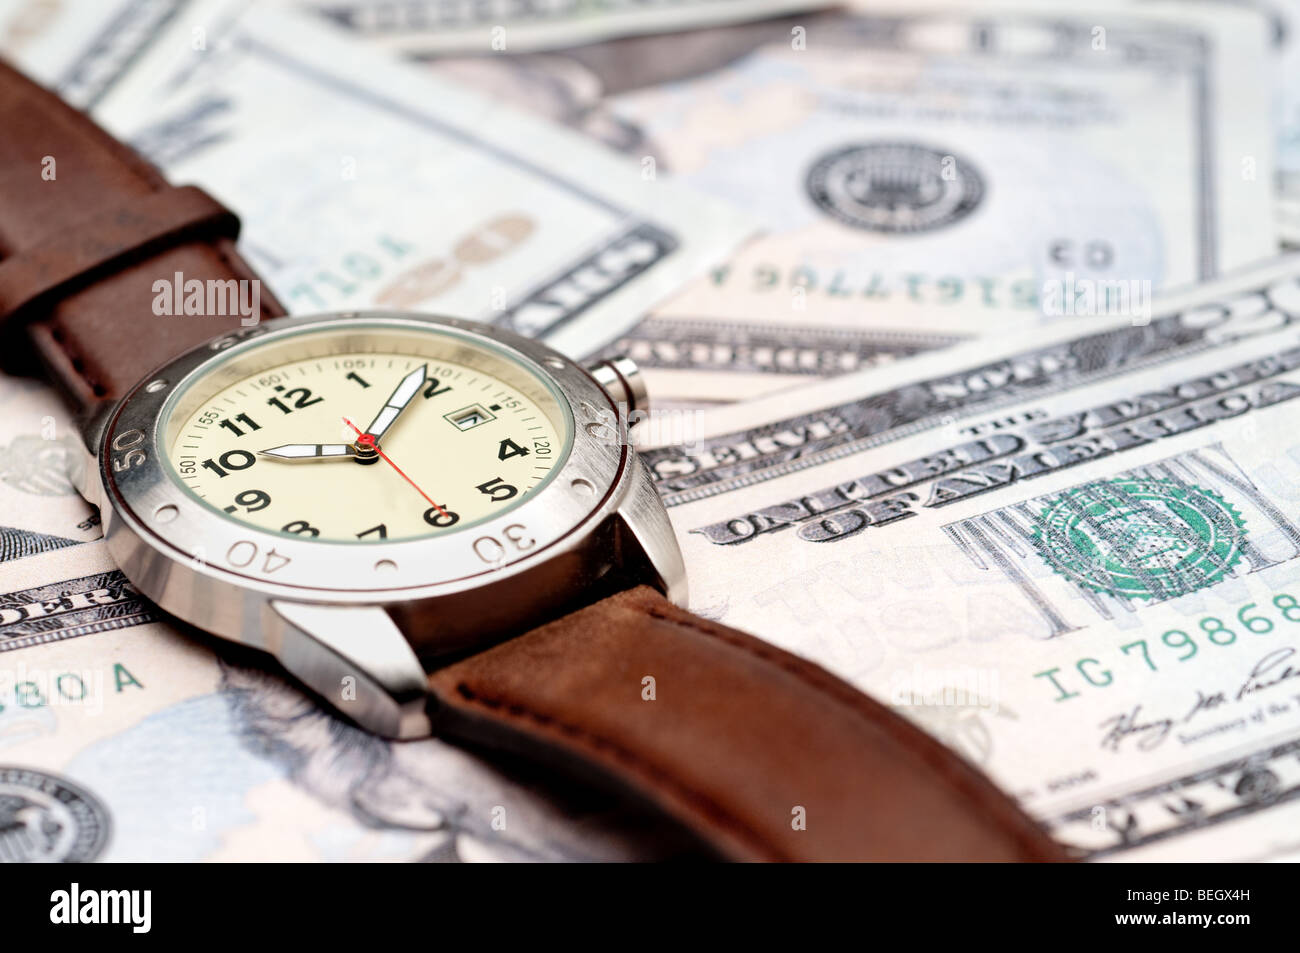 Horizontal image of a wristwatch on American currency Stock Photo